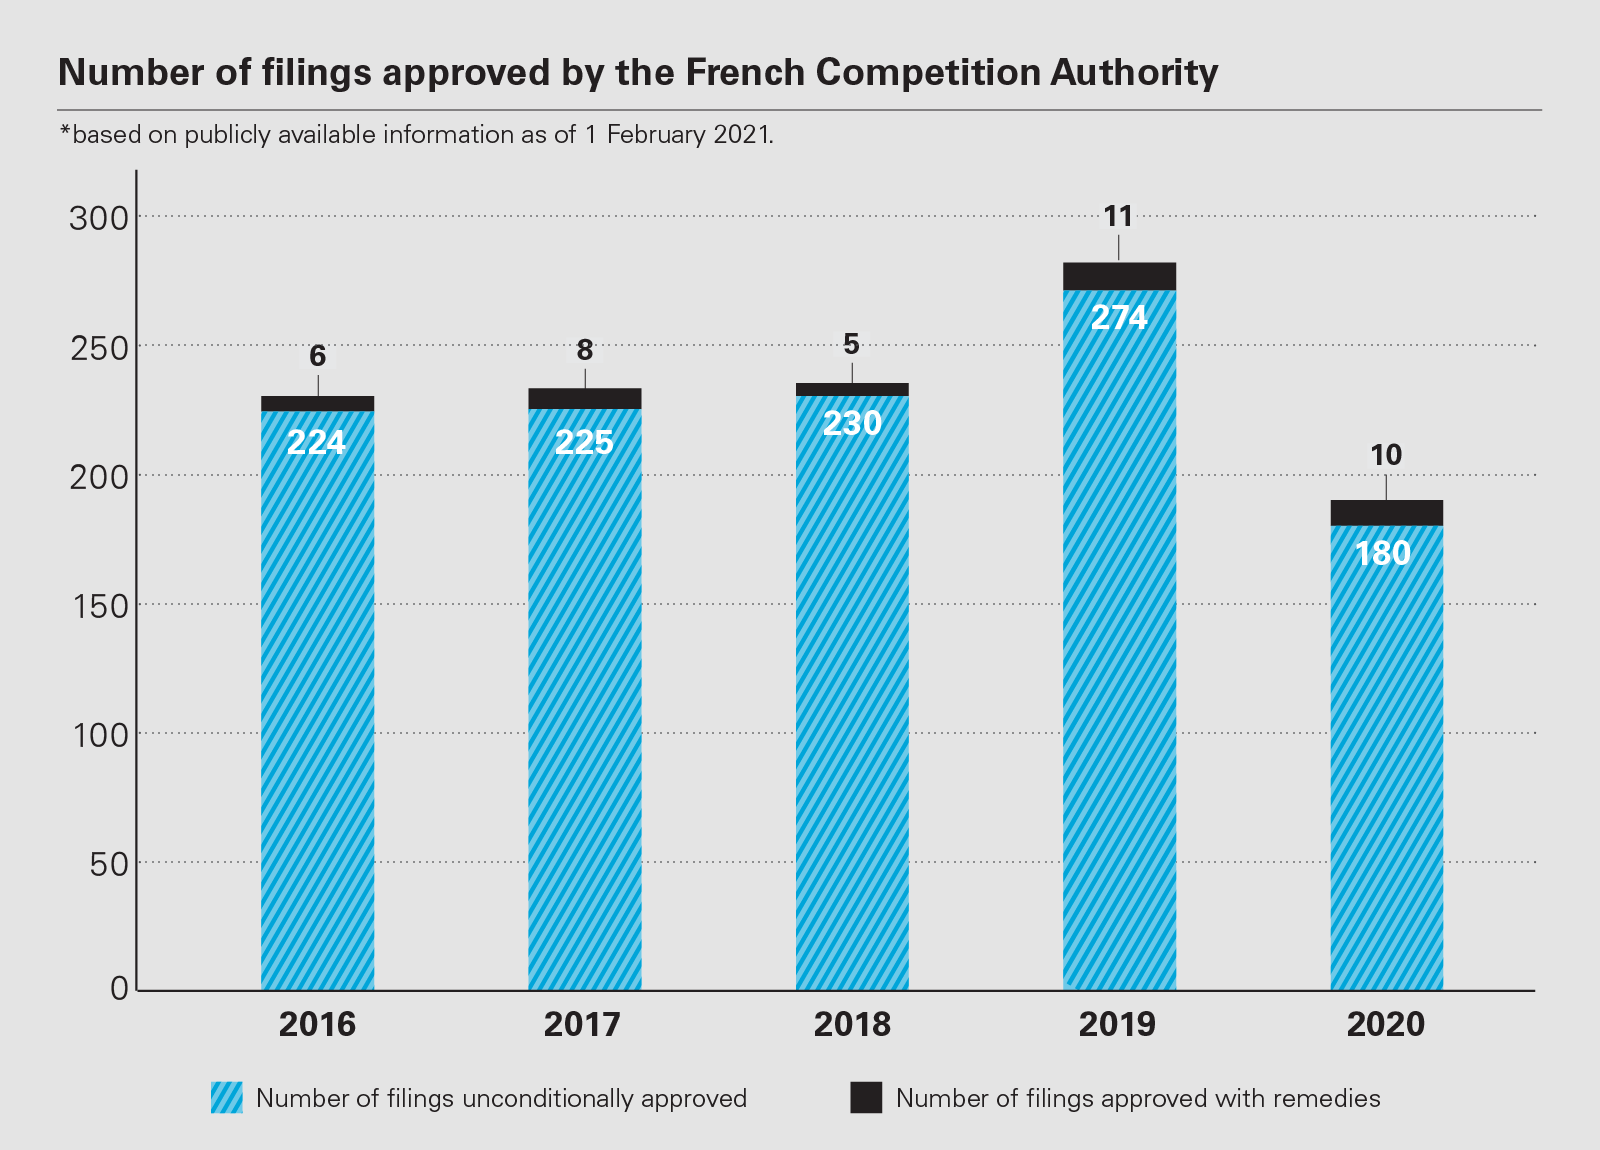 Number of filings approved by French Competition Authority